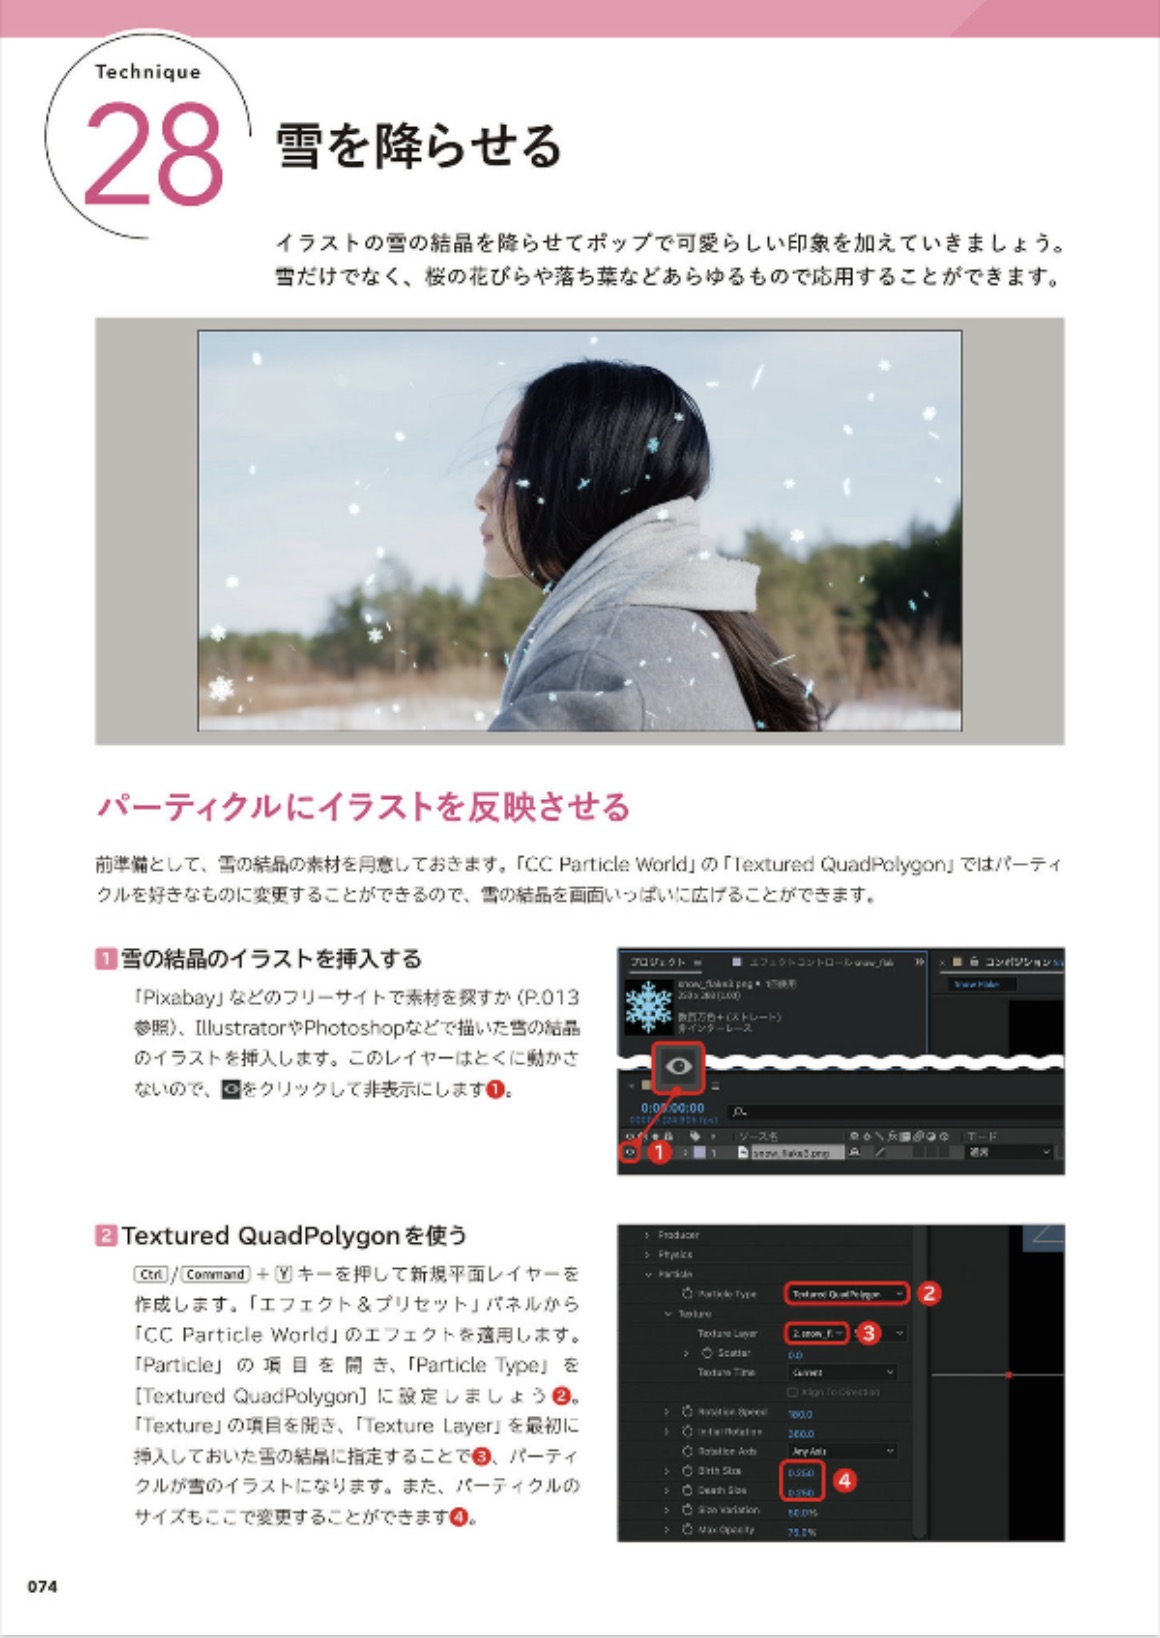 After Effects 演出テクニック100 すぐに役立つ! 動画表現のひきだしが増えるアイデア集